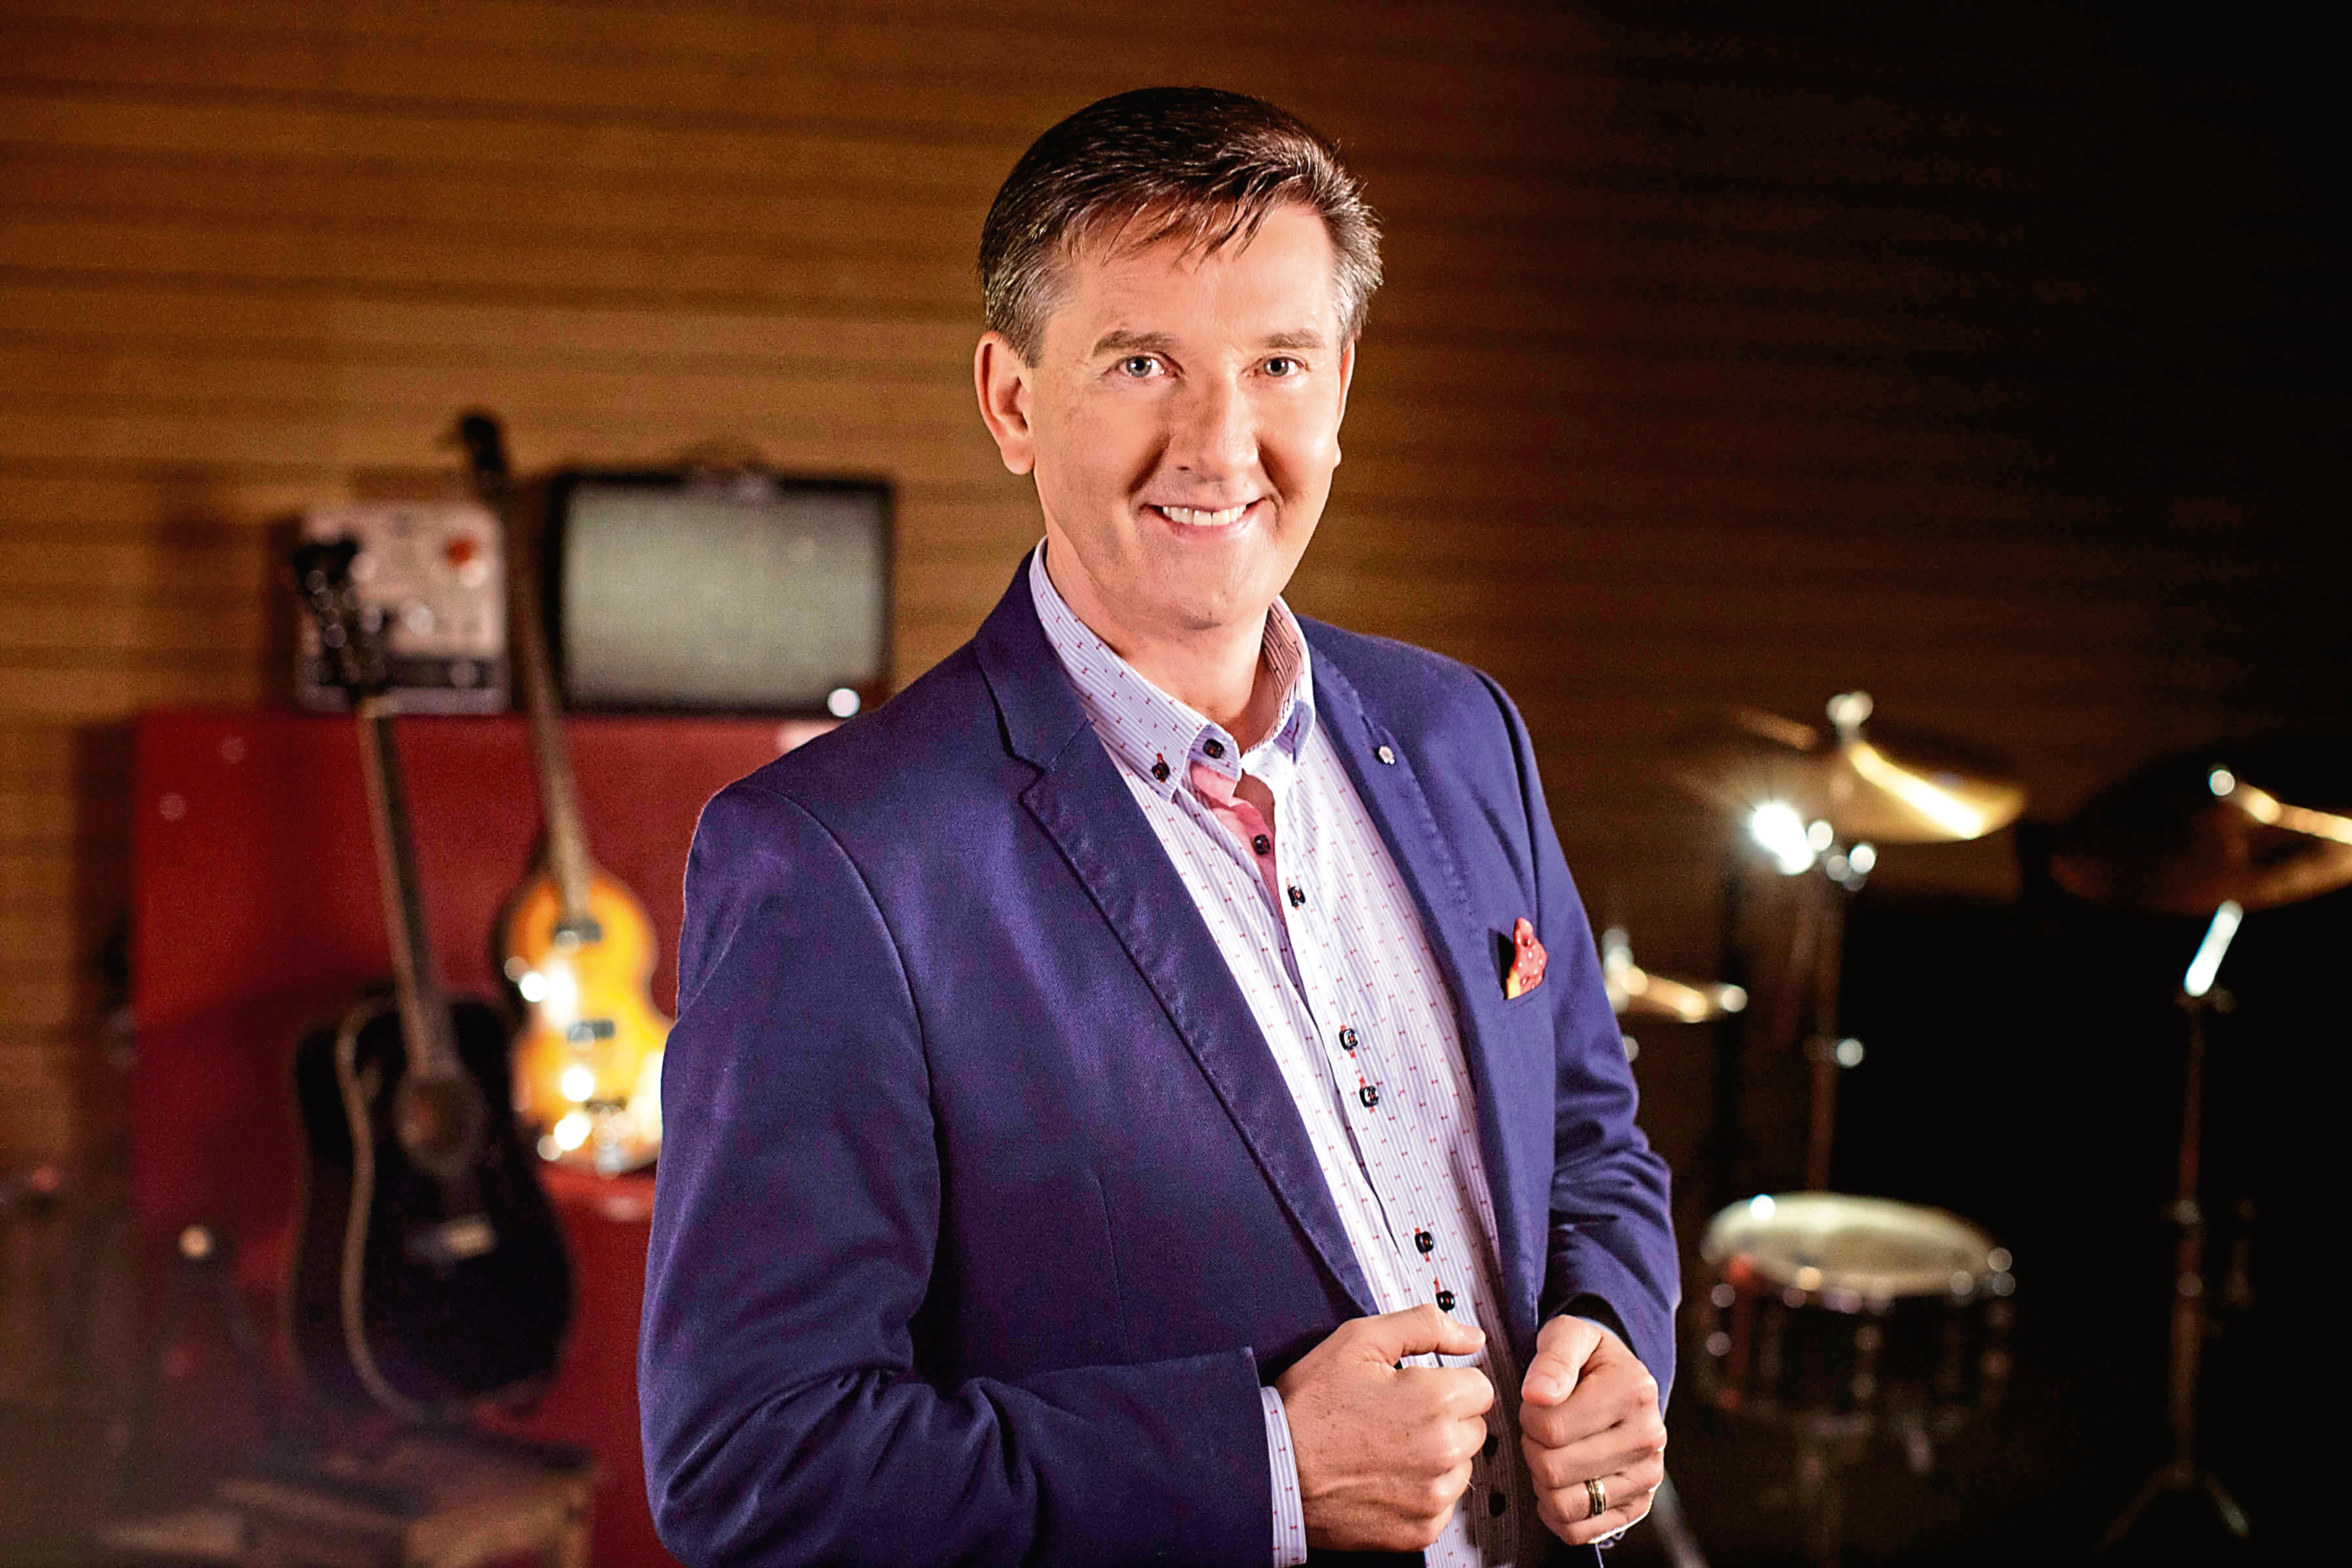 Daniel O’Donnell says he looks up to music greats like Dolly Parton and